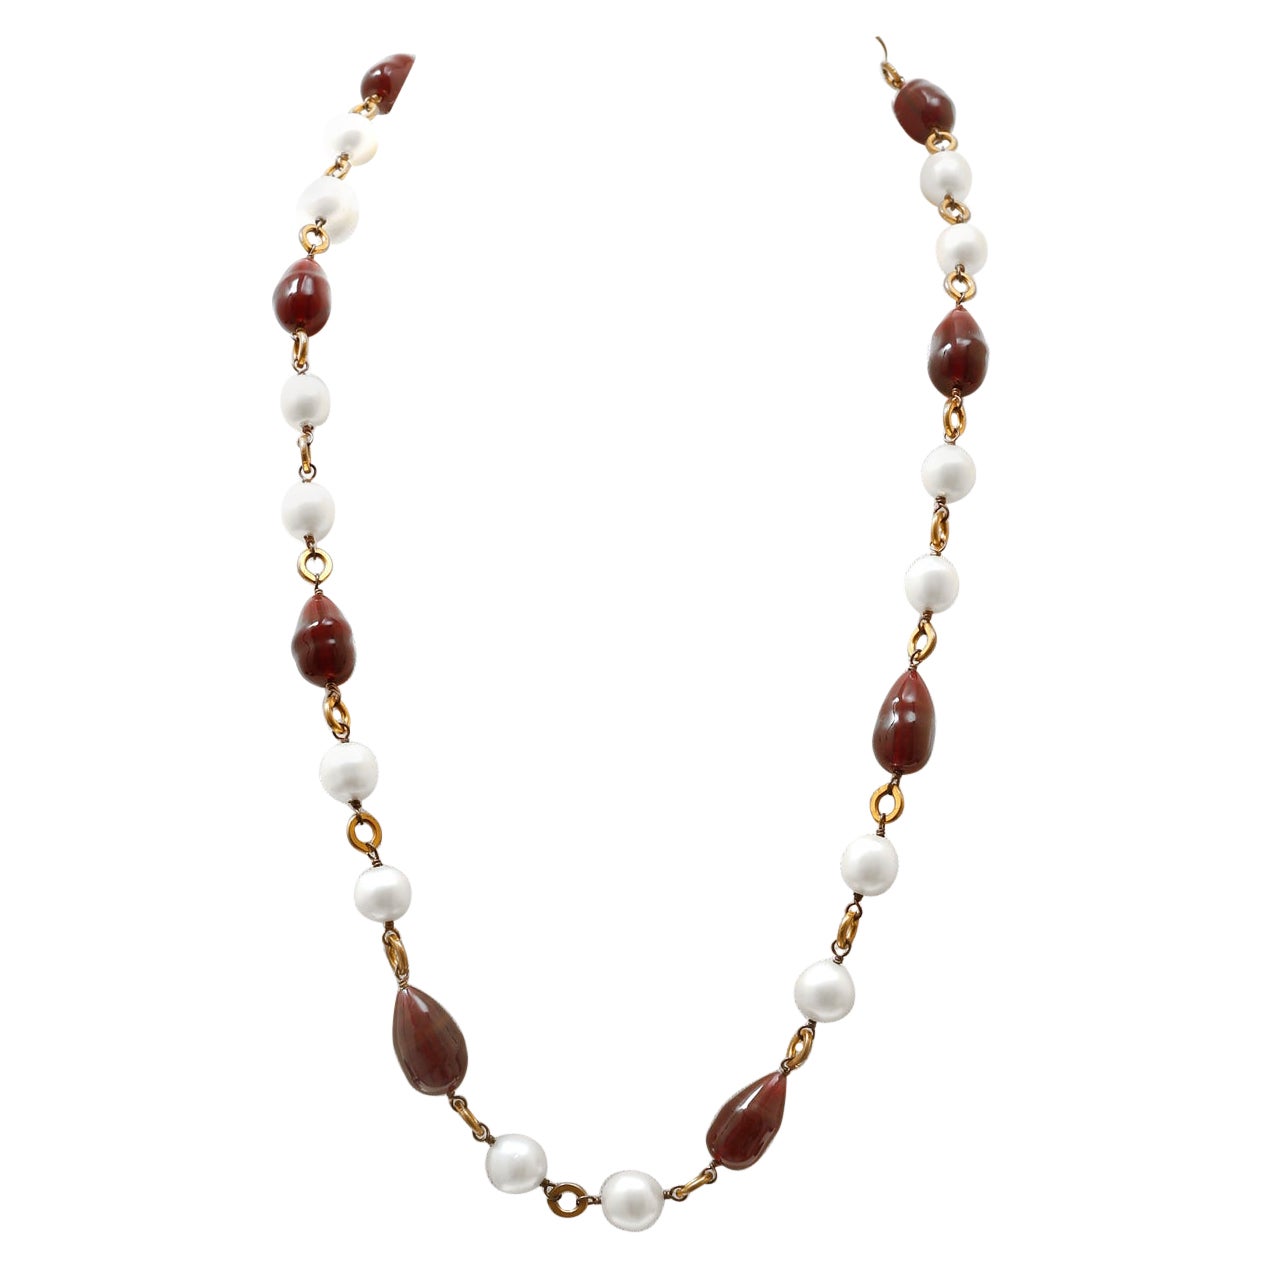 Chanel Red Gripoix Bead and Pearl Sautoir Vintage Necklace